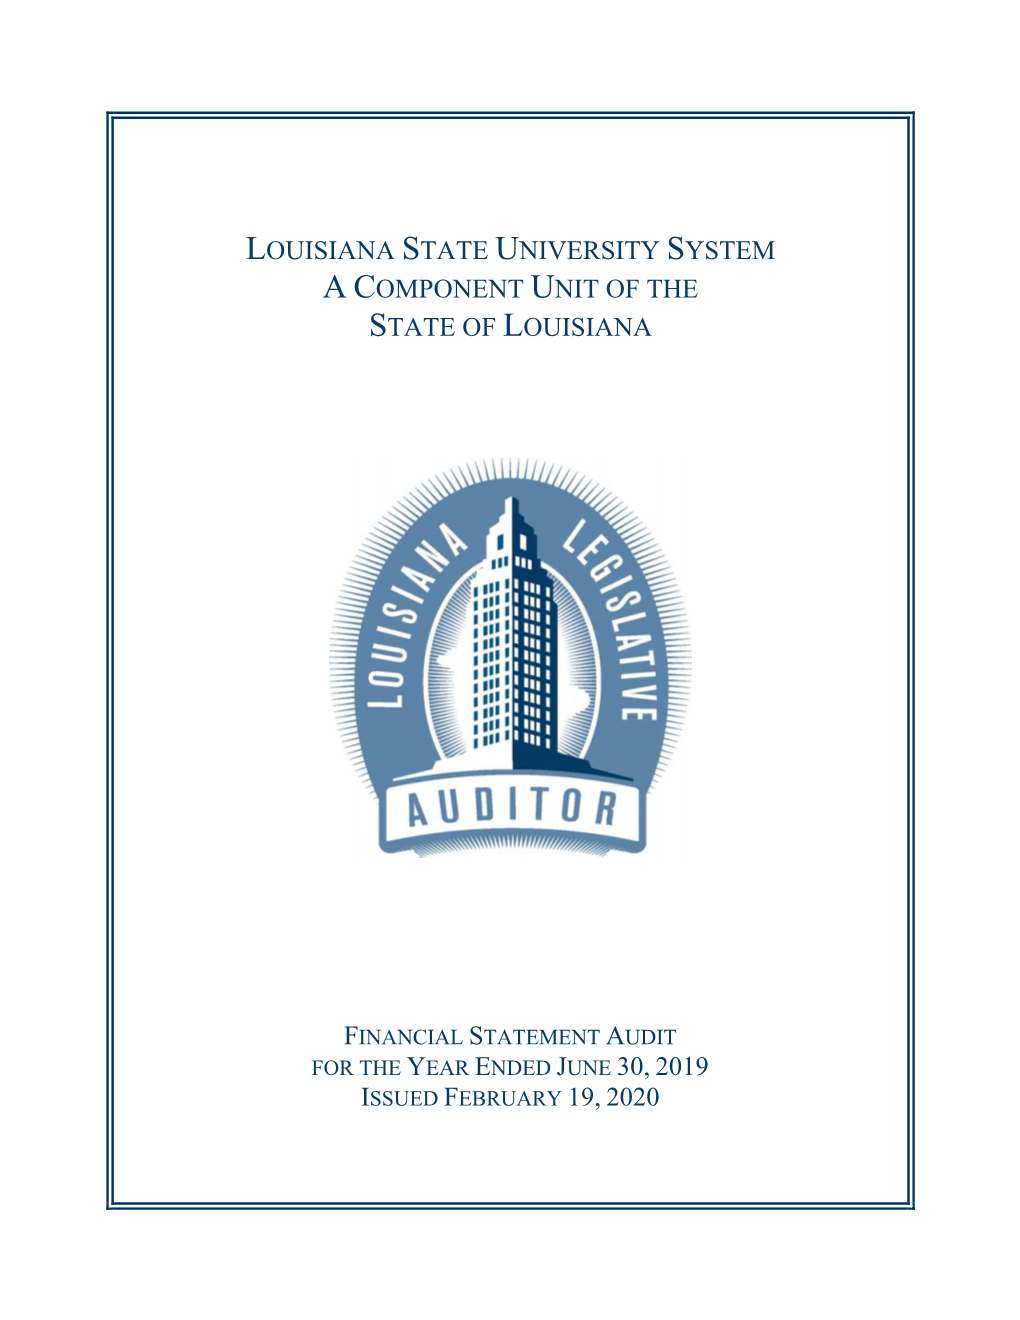 Louisiana State University System a Component Unit of the State of Louisiana